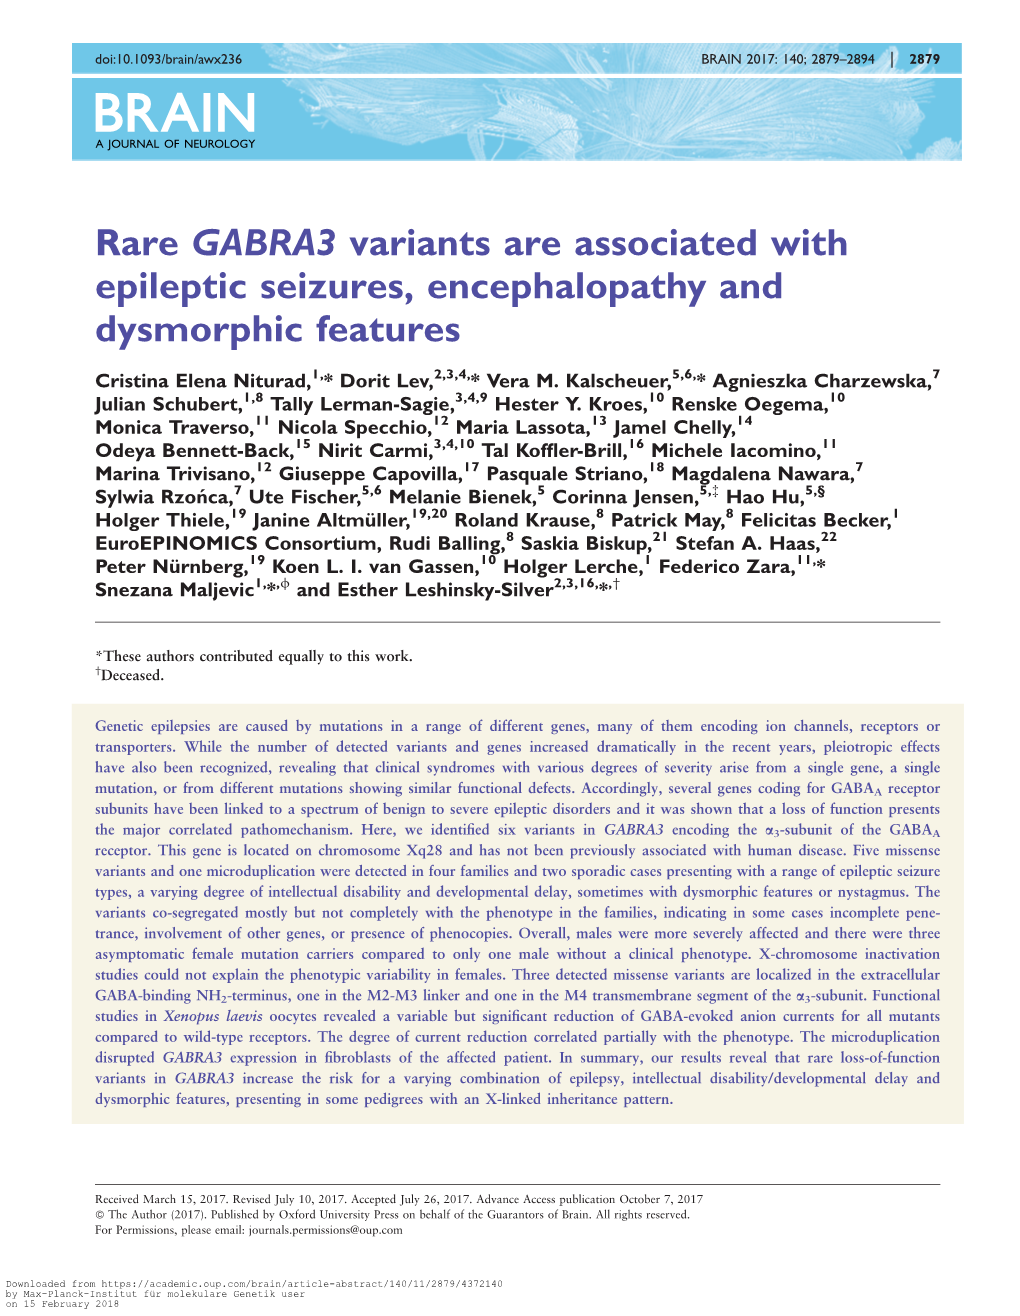 Rare GABRA3 Variants Are Associated with Epileptic Seizures, Encephalopathy and Dysmorphic Features